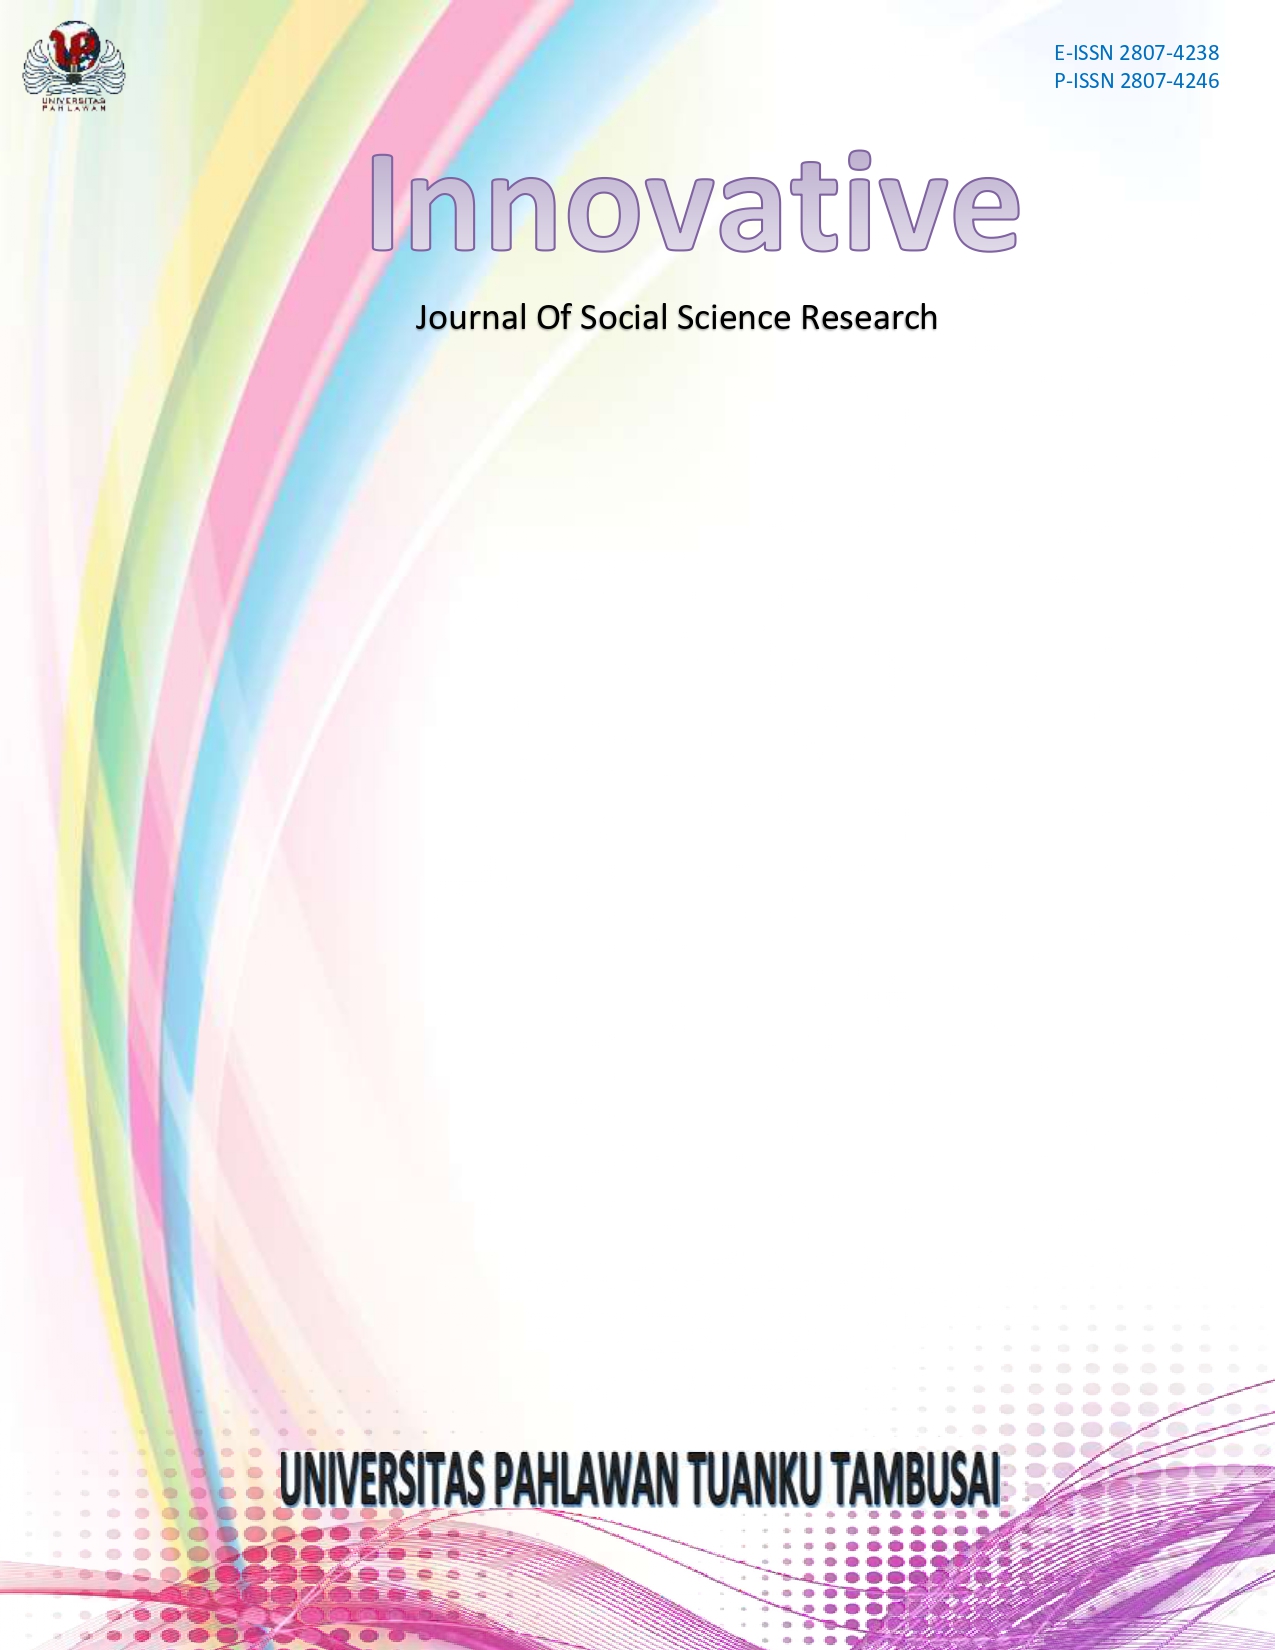 					View Vol. 1 No. 2 (2021): Innovative: Journal Of Social Science Research
				